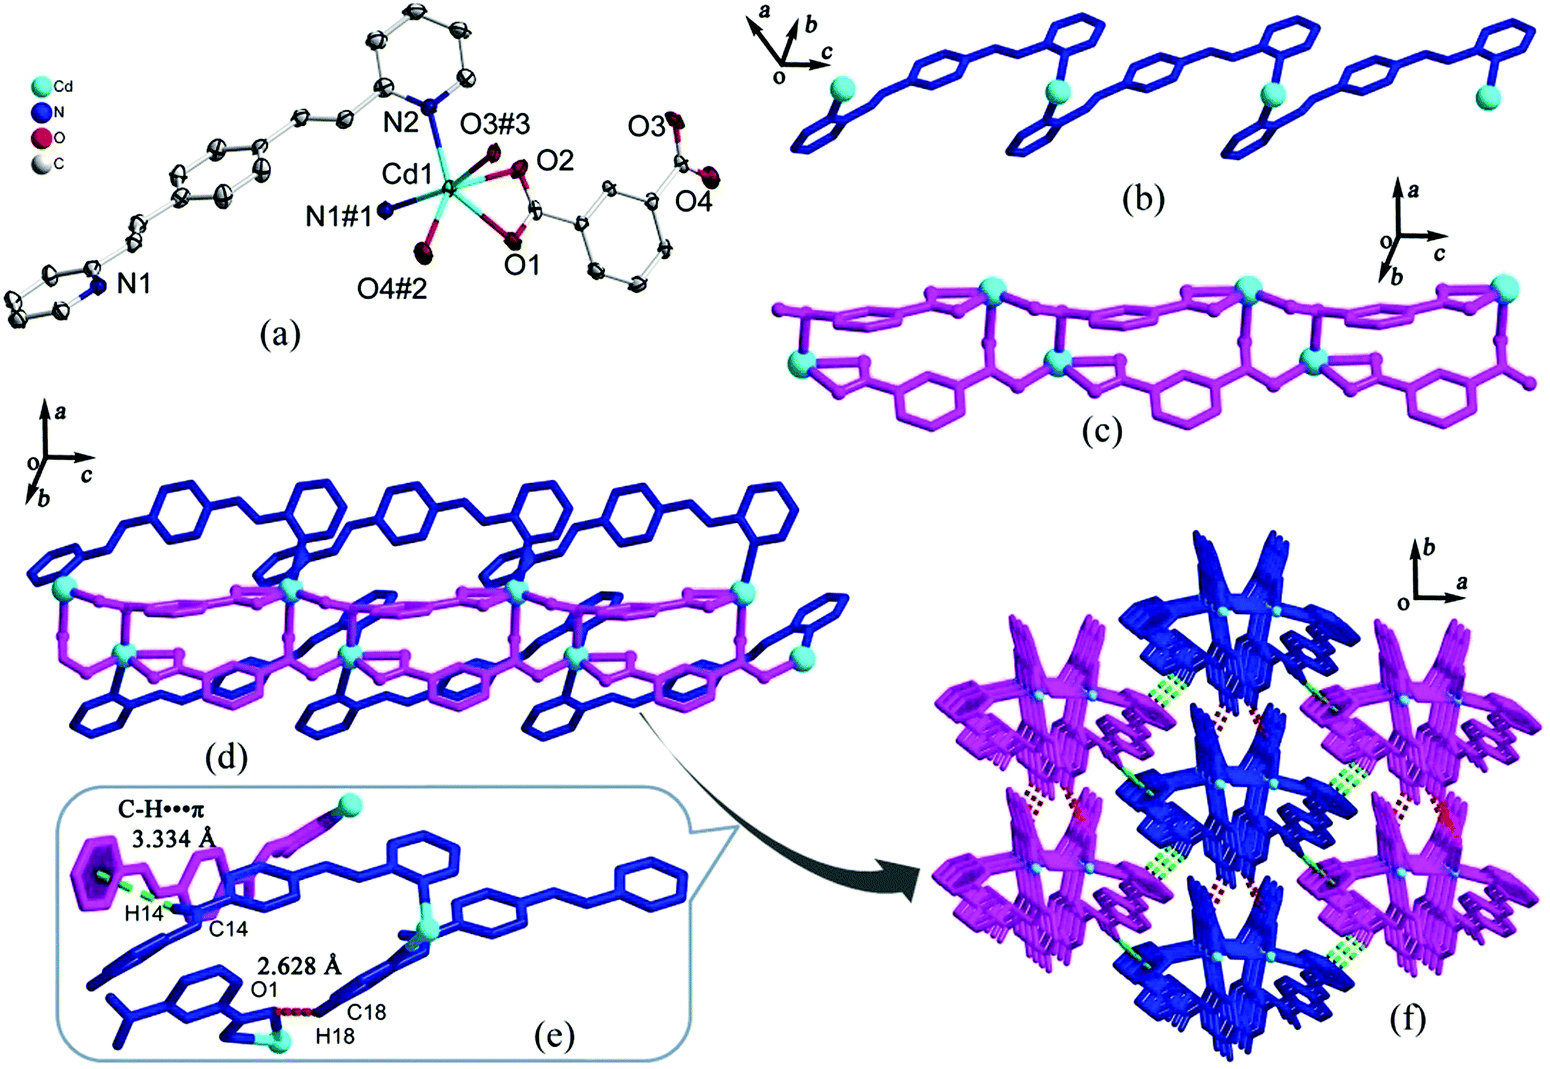 Cadmium Ii Coordination Polymers Based On 2 4 E 2 Pyridine 2 Yl Vinyl Styryl Pyridine And Dicarboxylate Ligands As Fluorescent Sensors For Tnp Journal Of Materials Chemistry C Rsc Publishing